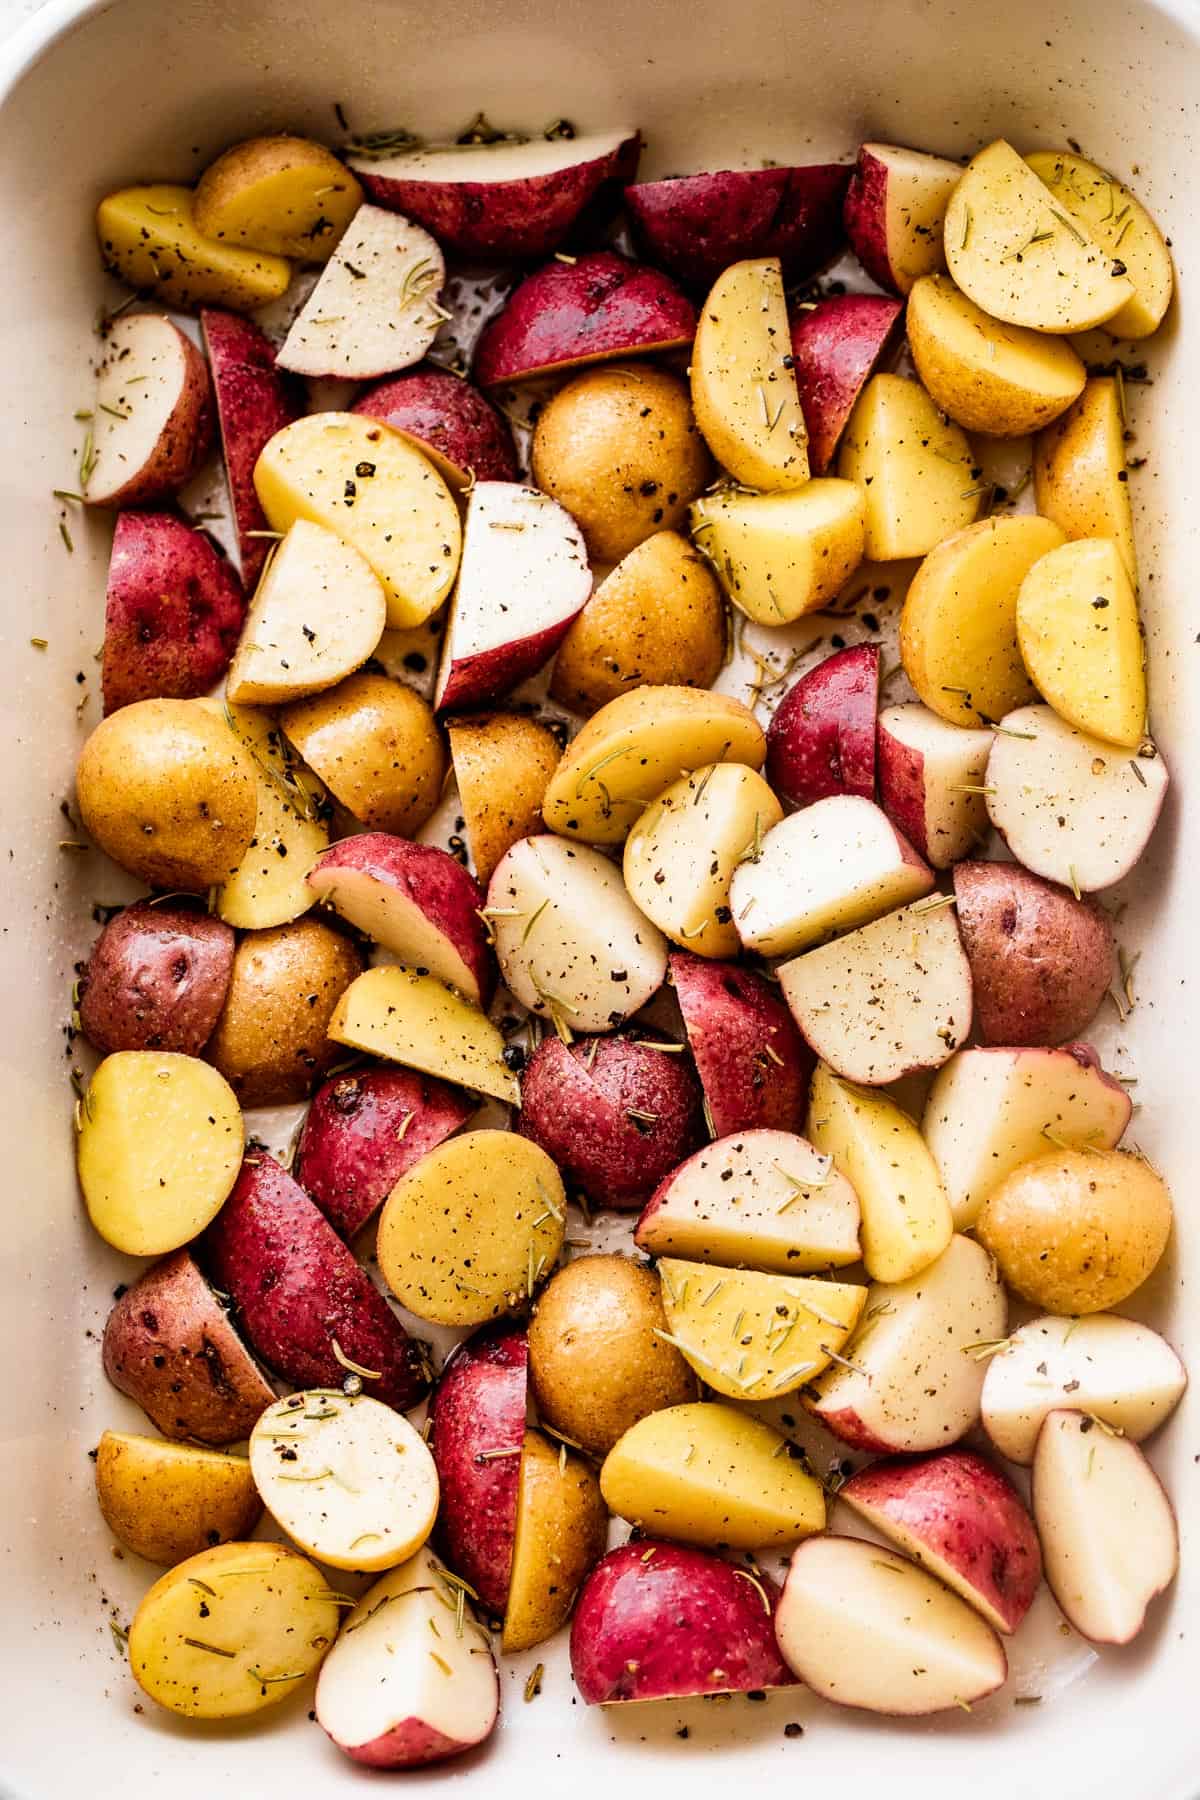 quartered and colorful baby potatoes arranged in a baking dish and seasoned with dried herbs